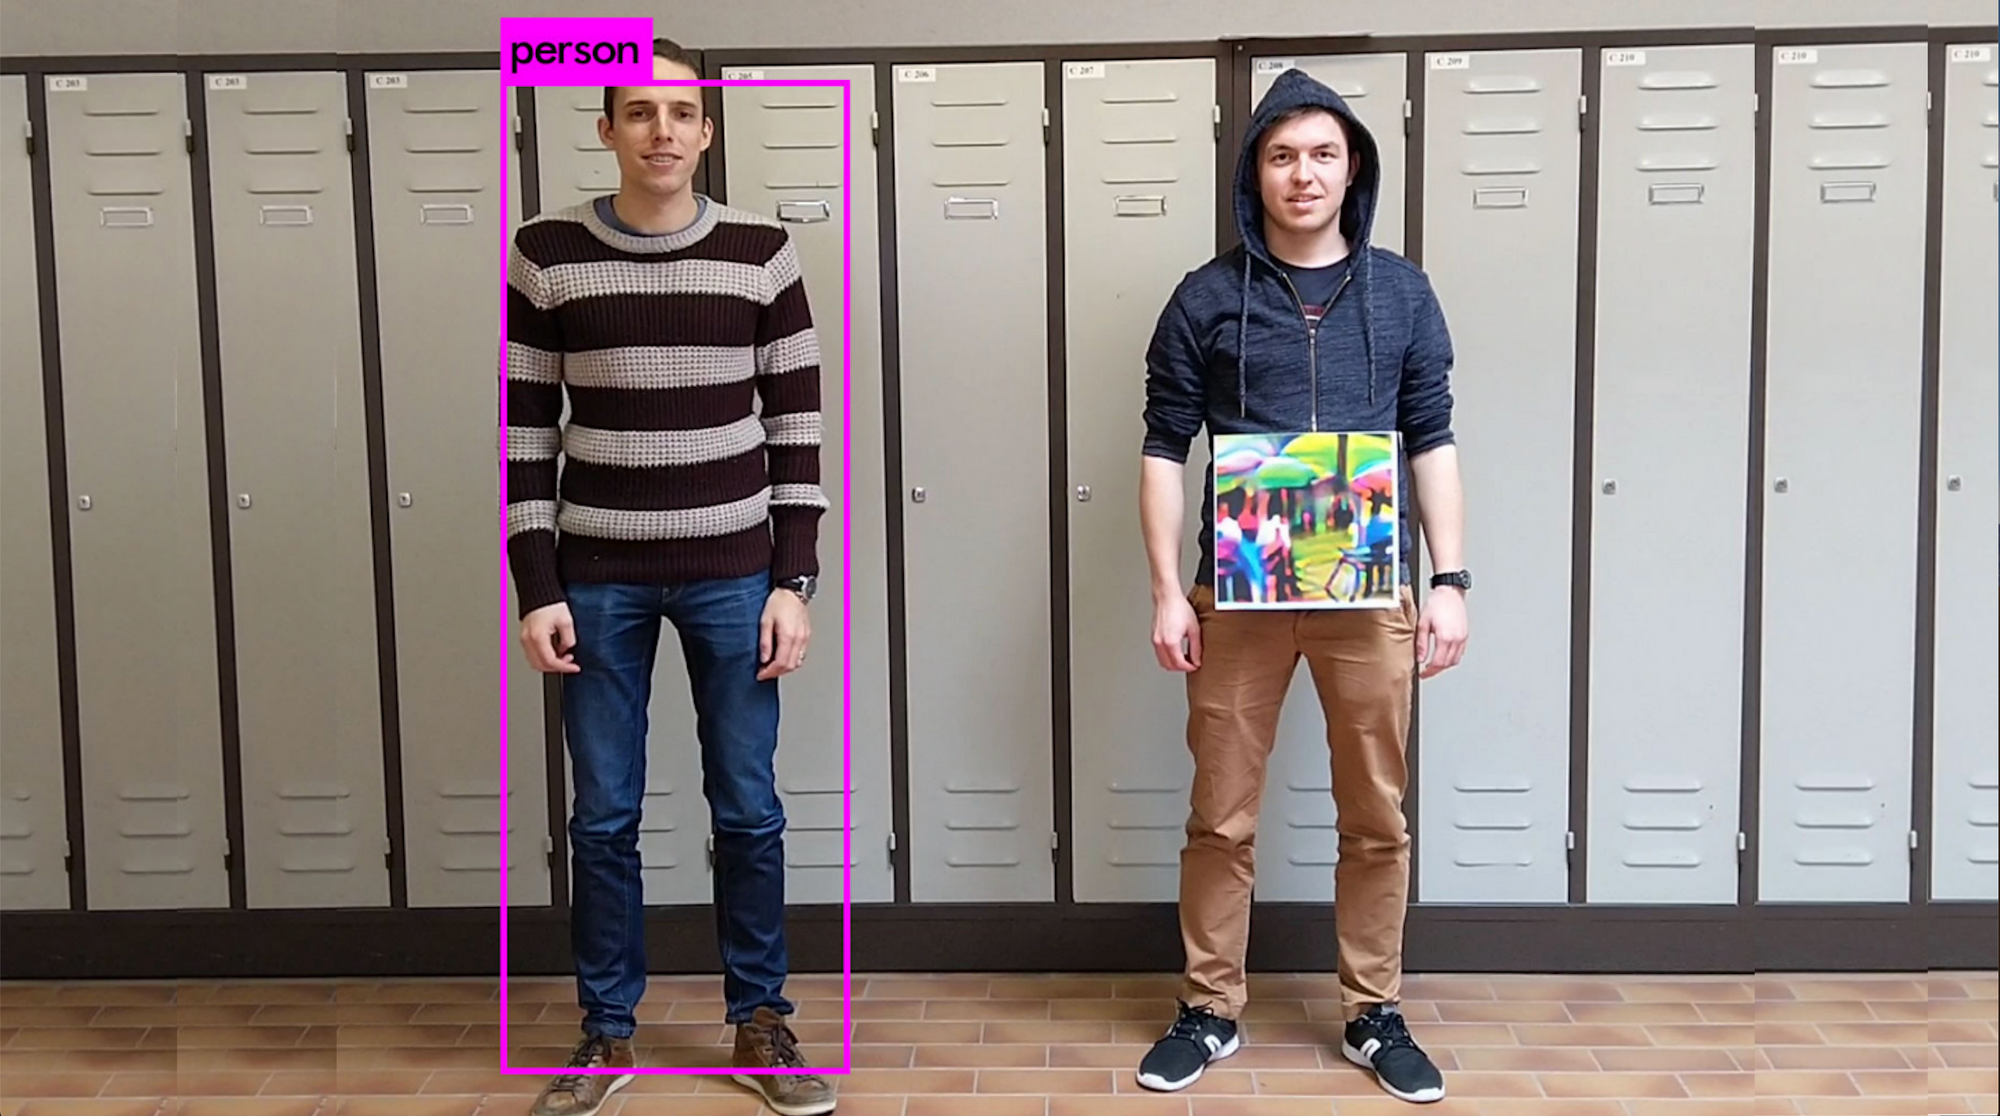 Example of adversarial patches against YOLOv2